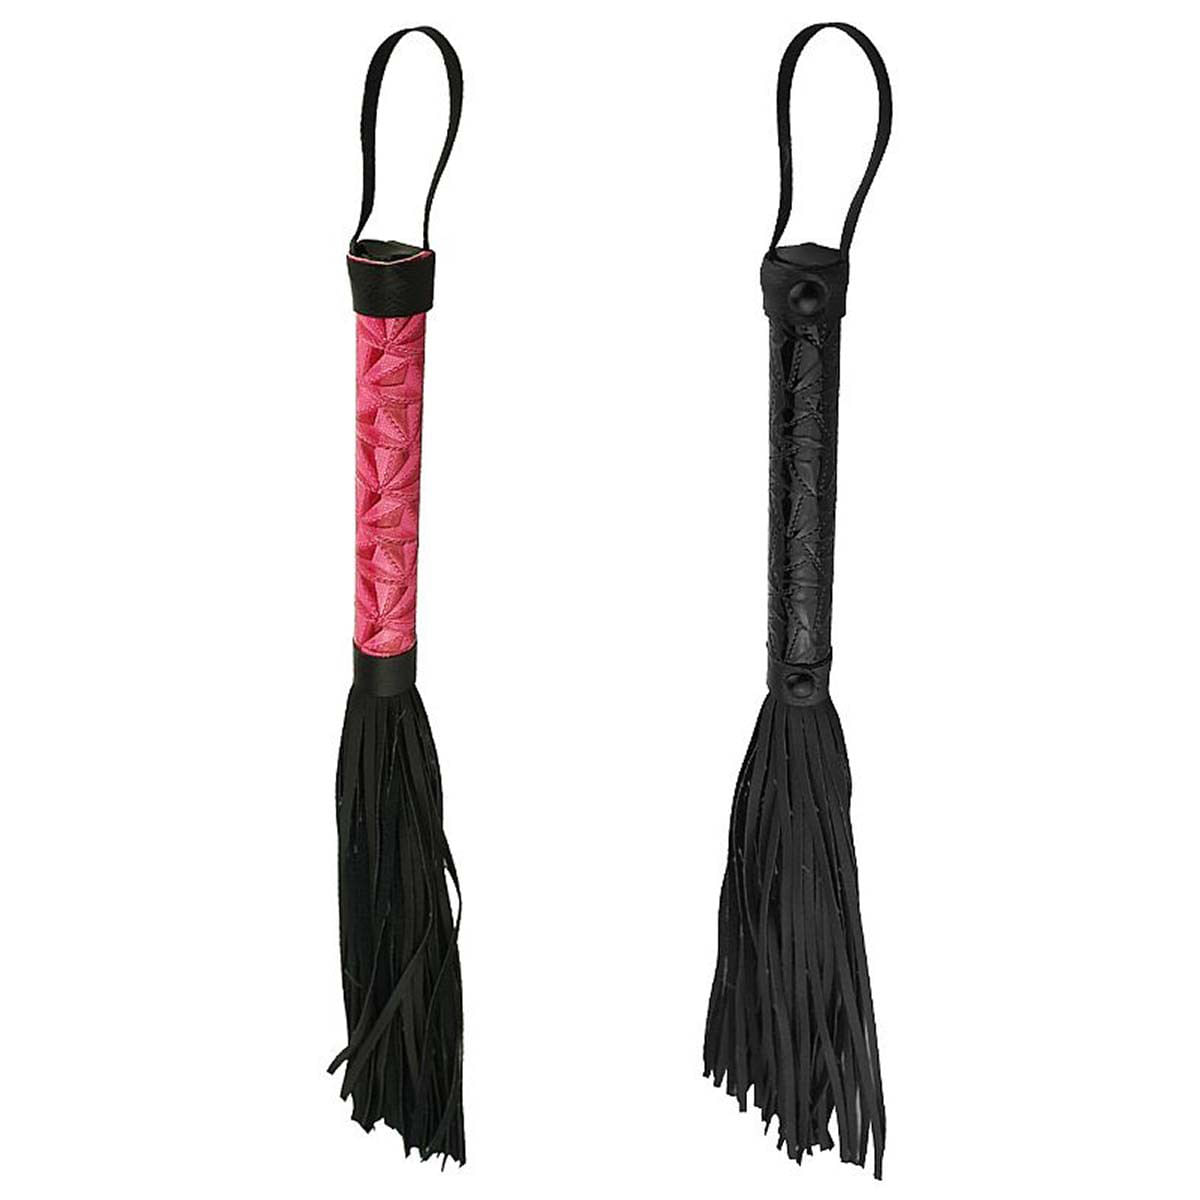 Luxury Fetish Passionate Flogger Chicote de Luxo Miss Collection